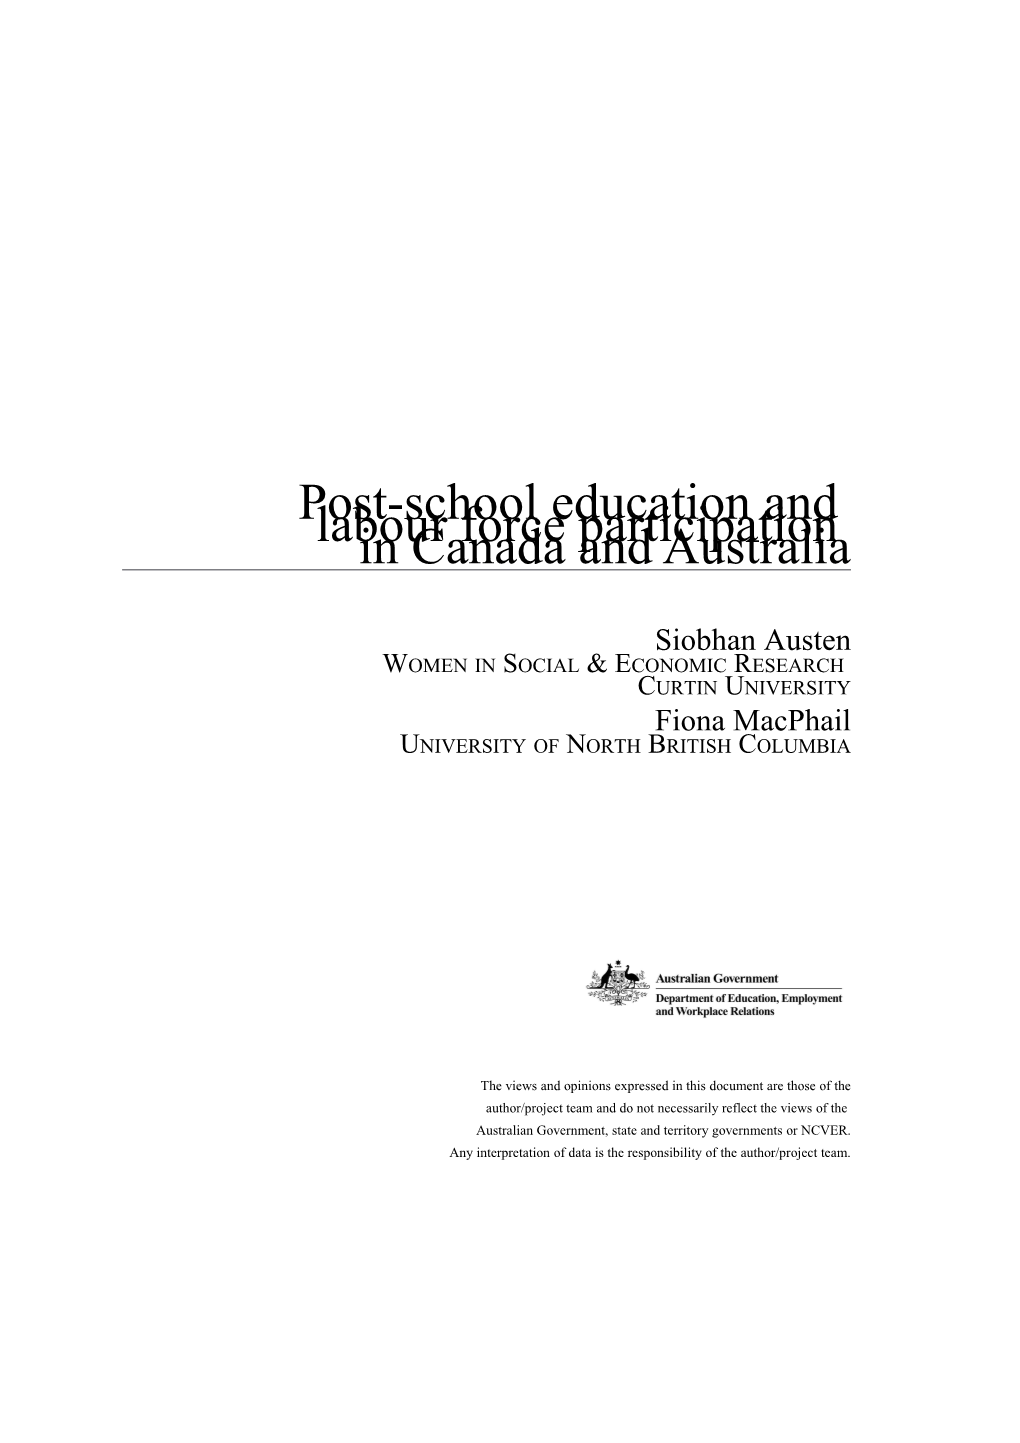 Post-School Education and Labour Force Participation in Canada and Australia